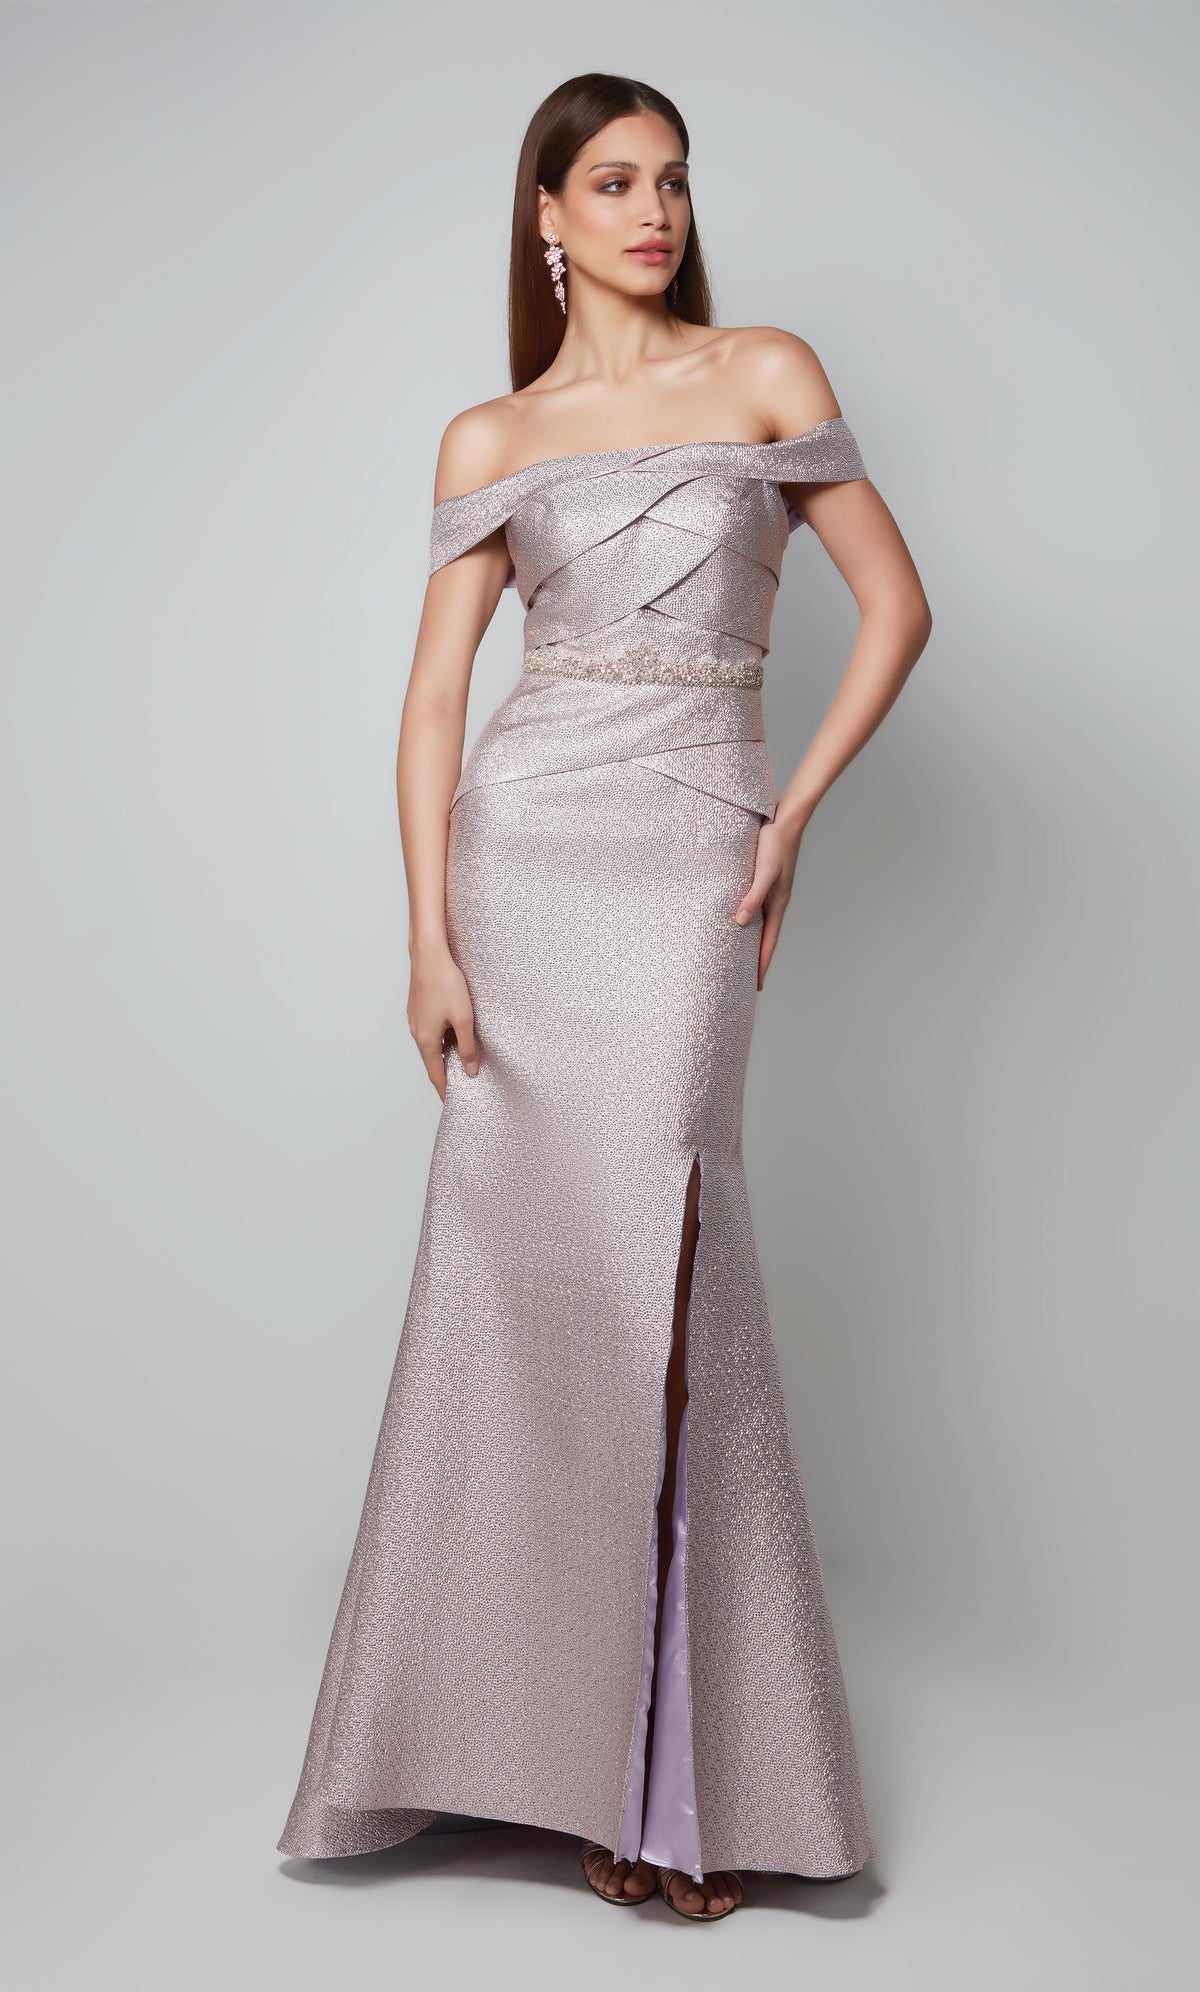 Light pink metallic off the shoulder special occasion dress with a beaded waist and side slit.